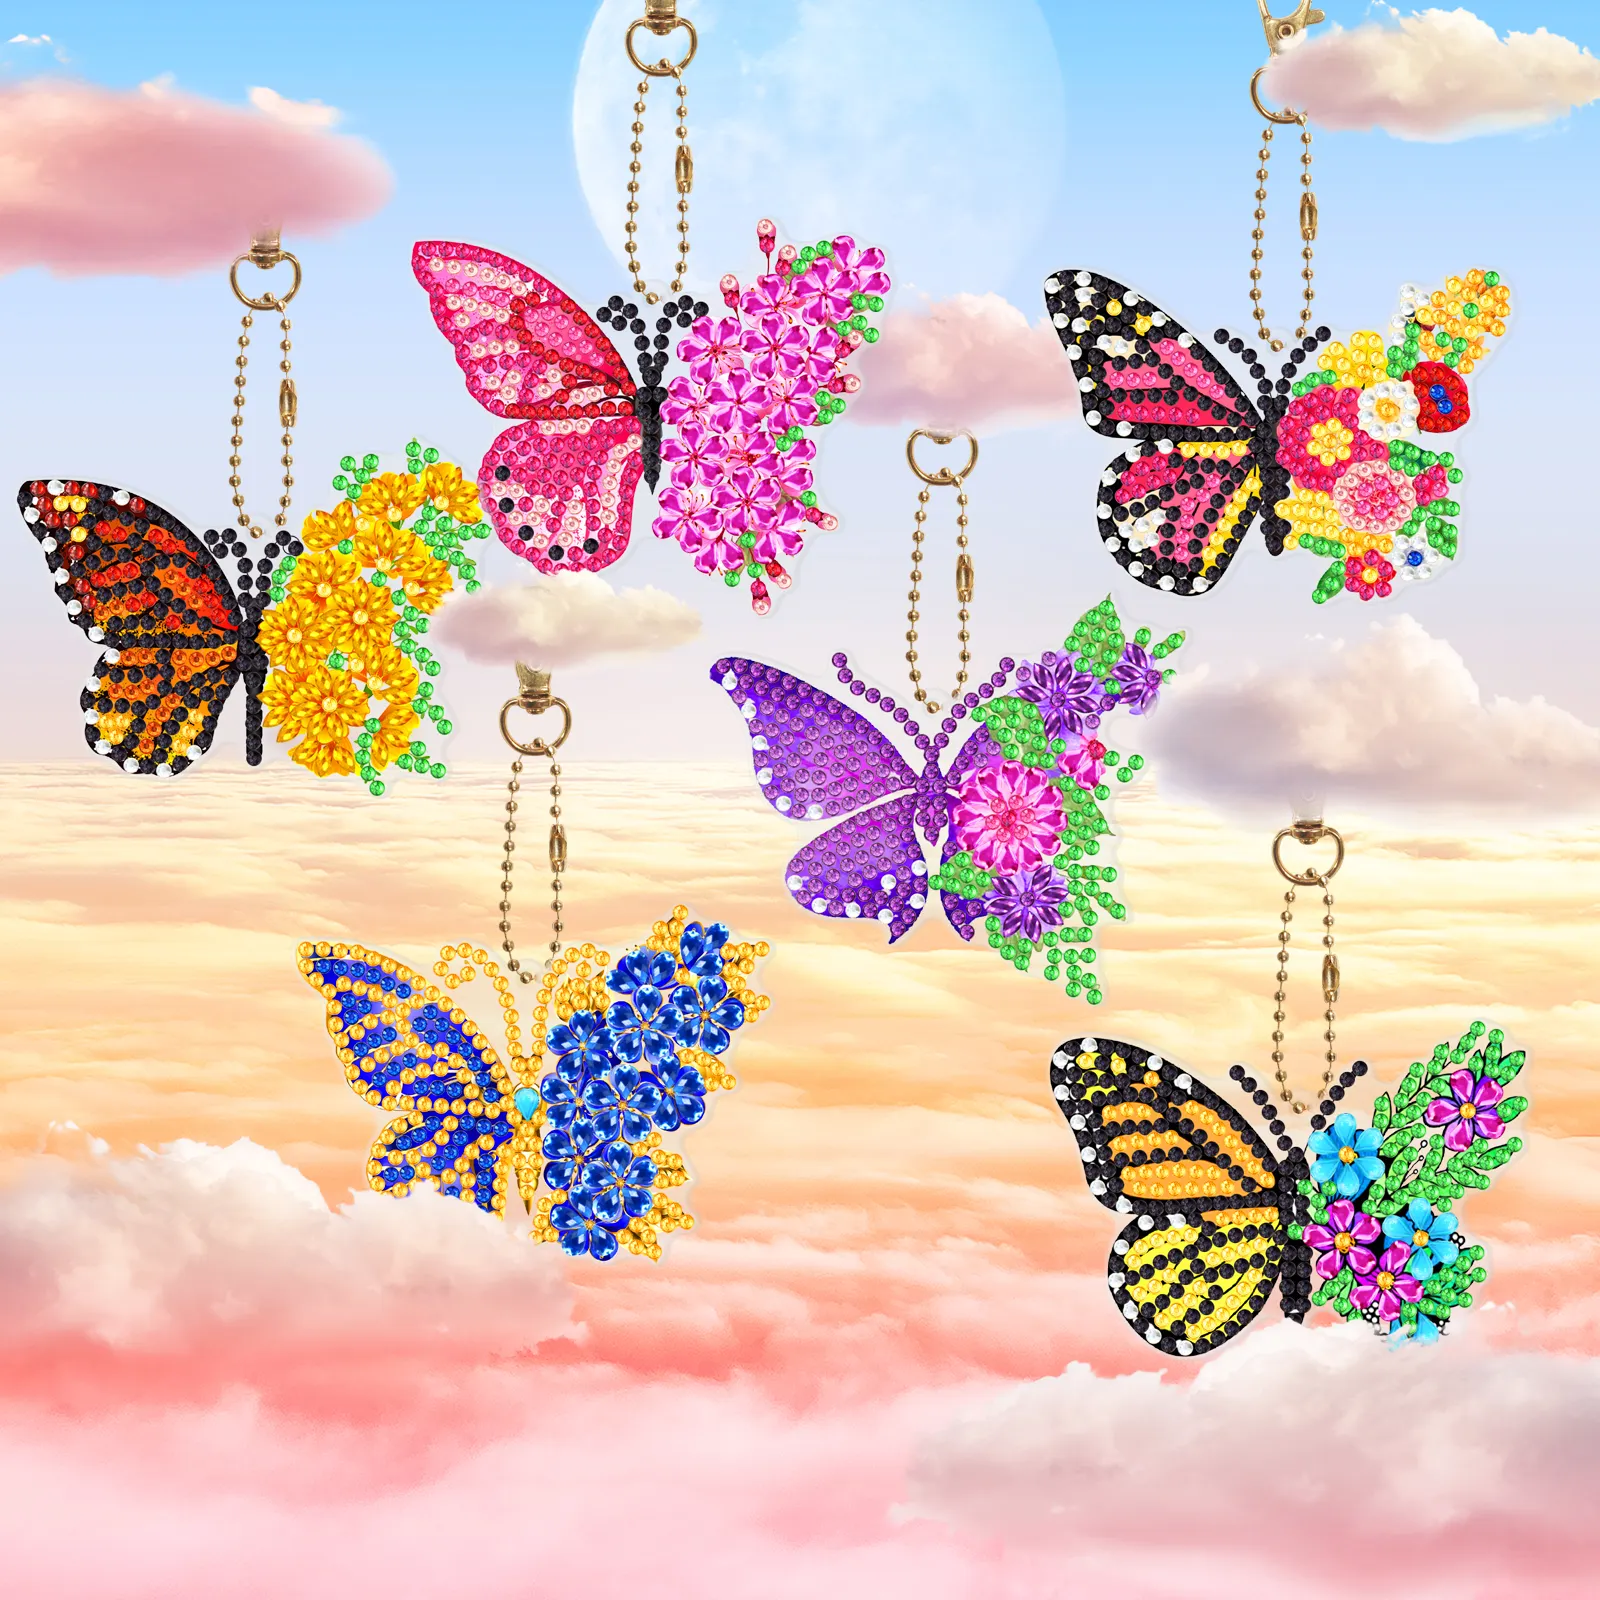 6pcs/set DIY Diamond Painting Keychains Butterfly Double Sided Crystal Rhinestones Diamond Art Keychains for Adults and Kids